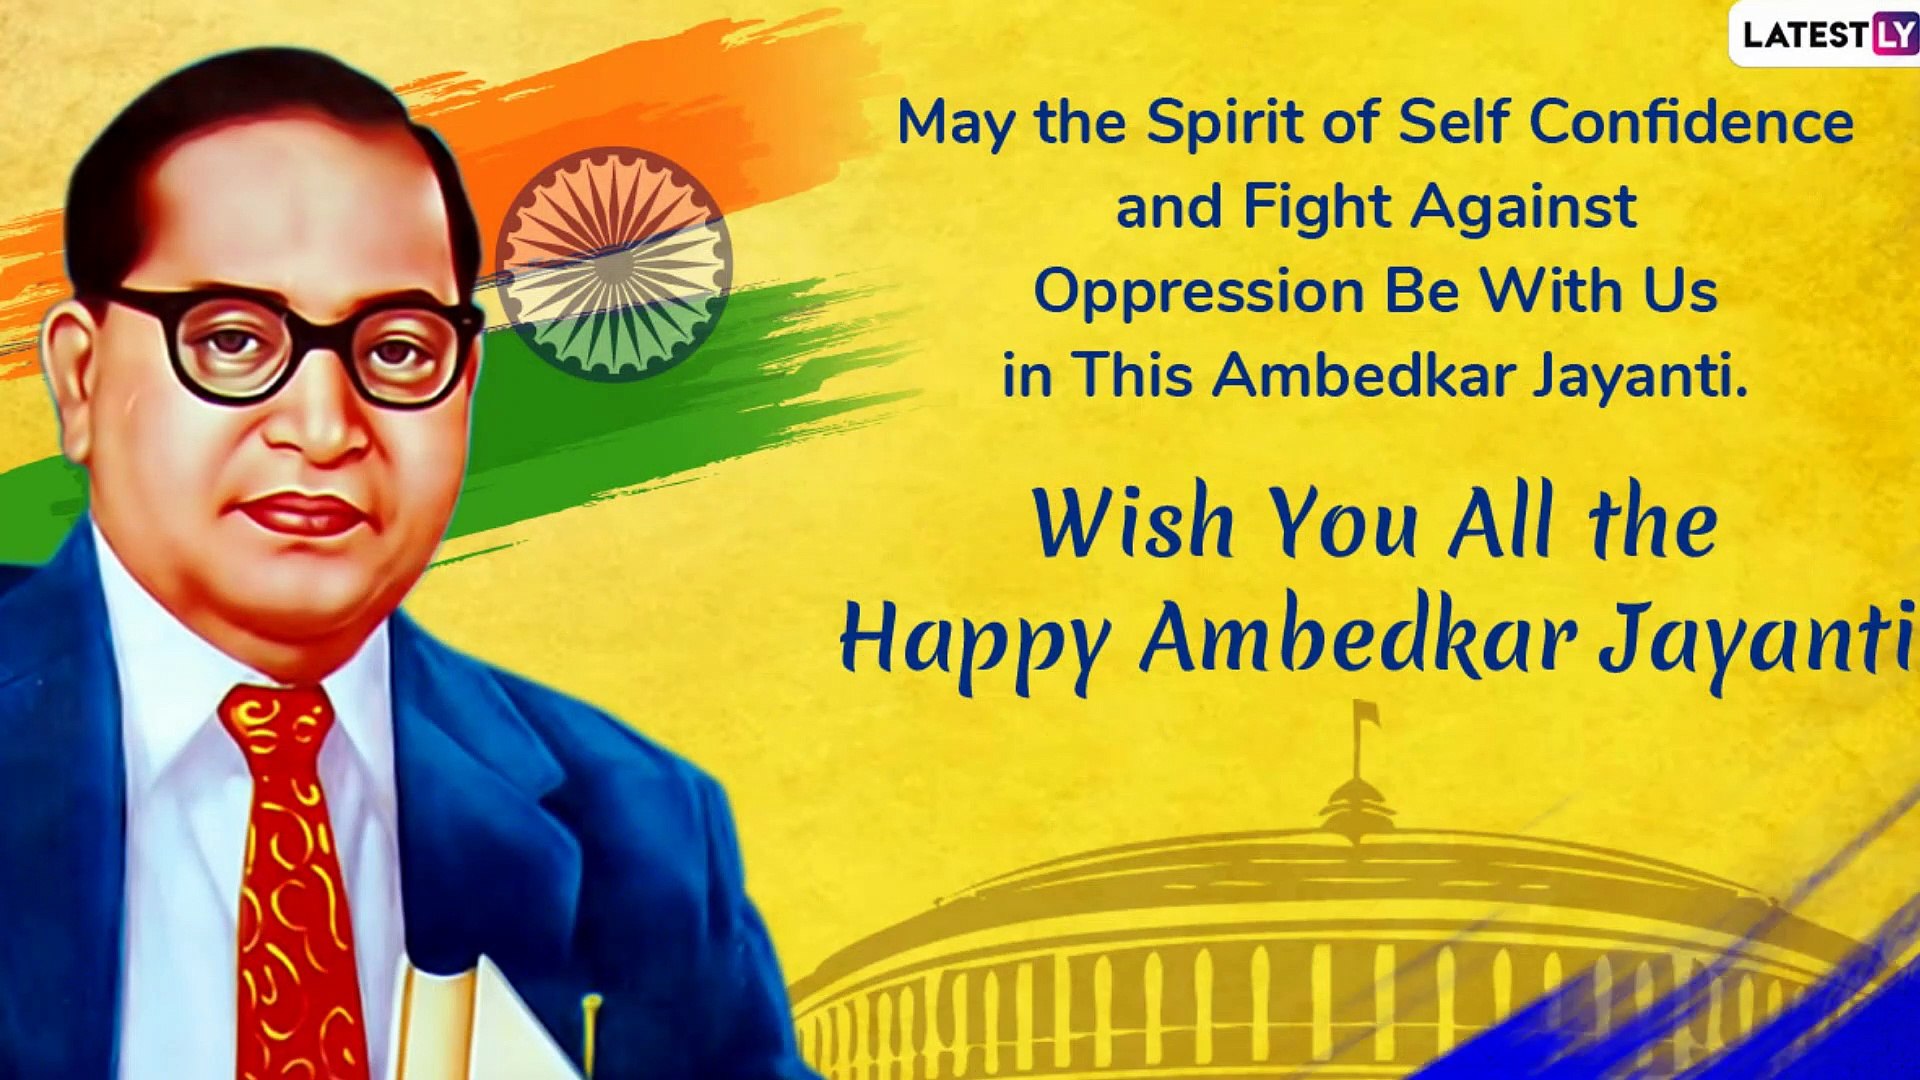 Ambedkar Jayanti 2020 Wishes: Messages, Images & Quotes To Share Greetings  On This Bhim Jayanti - video Dailymotion